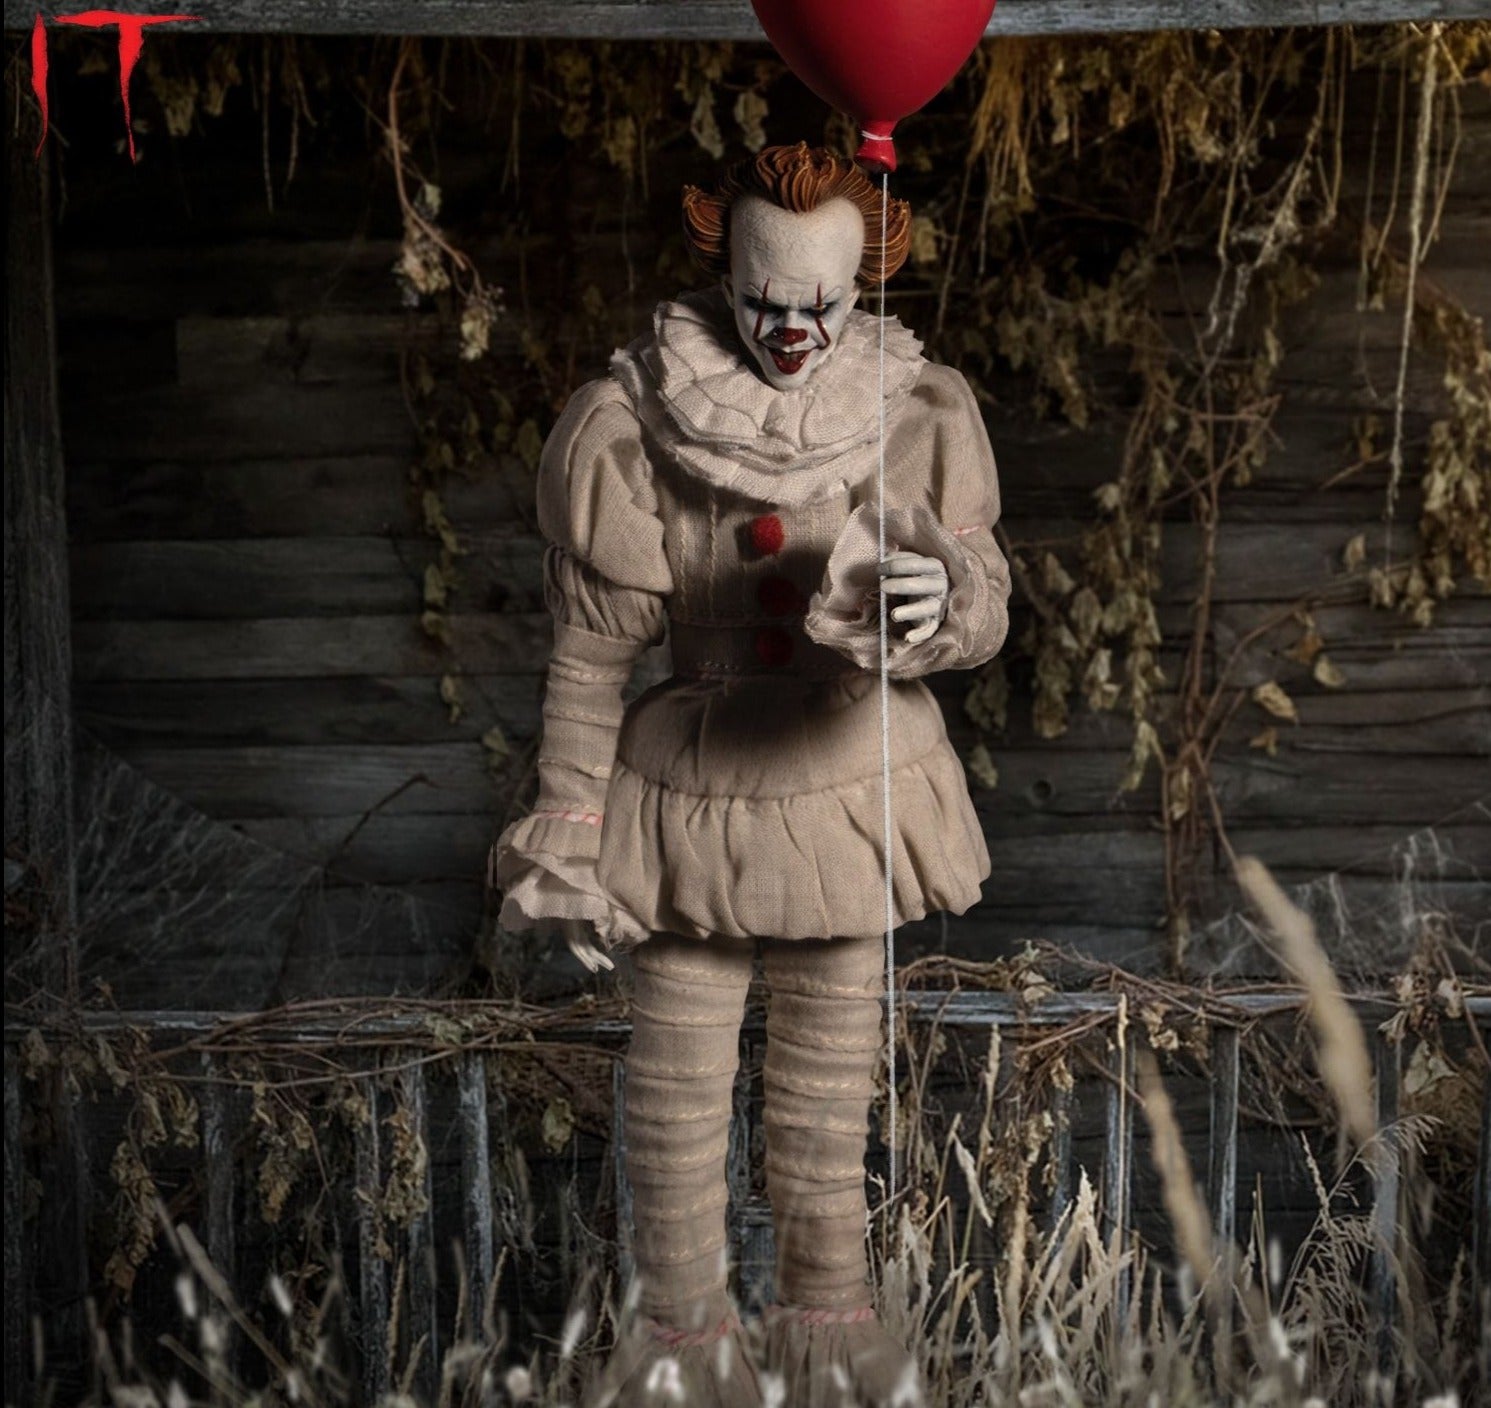 Mezco Toys One:12 Collective: IT: Pennywise Action Figure 2